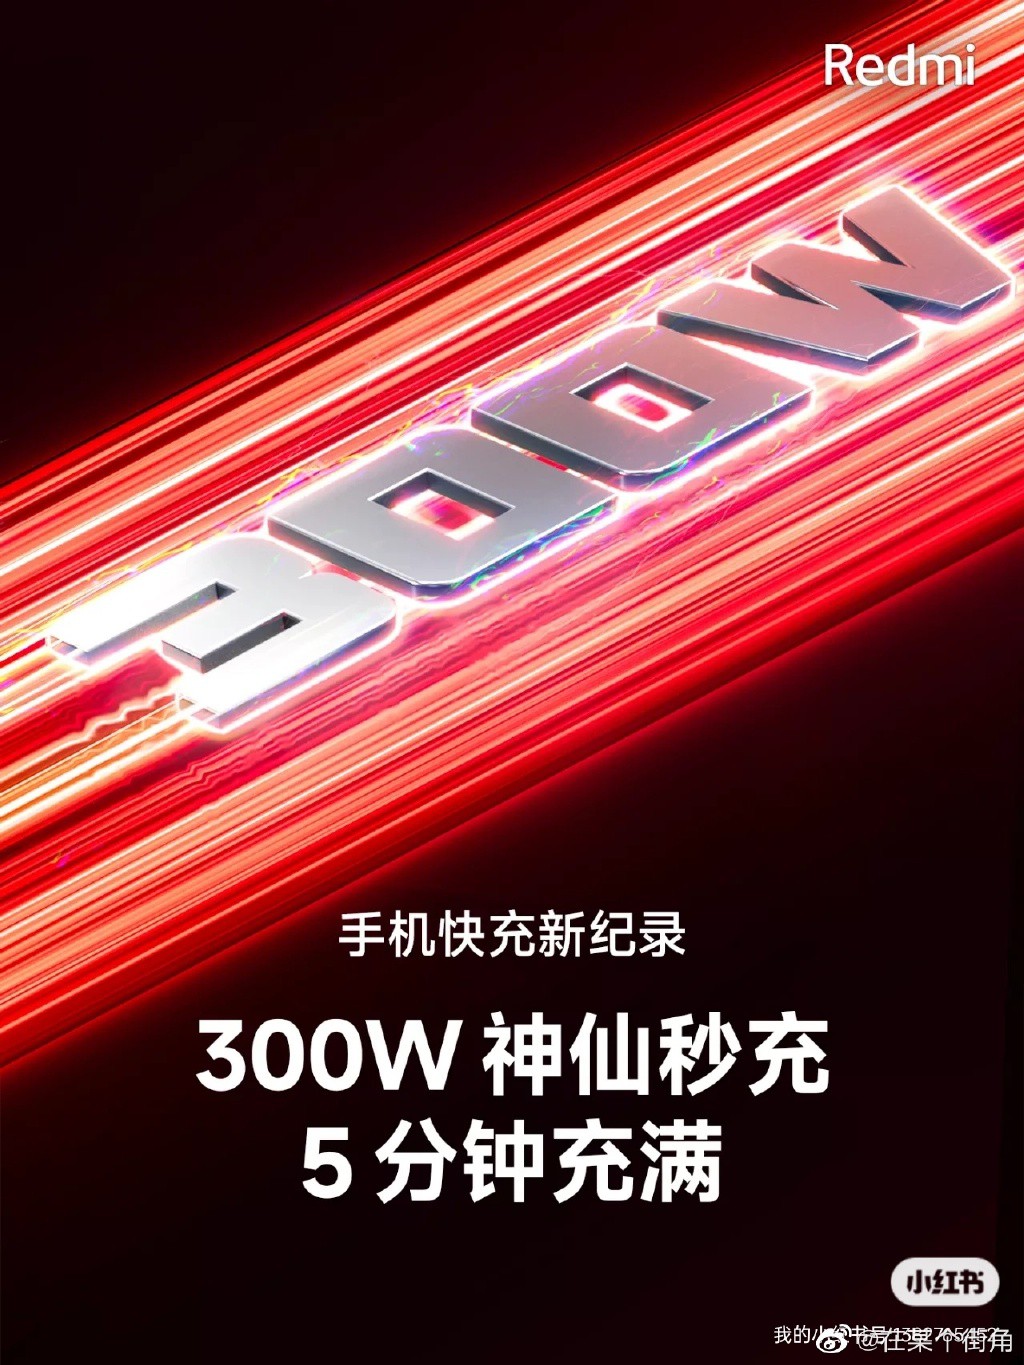 Redmi's 300W fast charging announced; a 4100mAh battery takes just 5-minutes | DroidAfrica